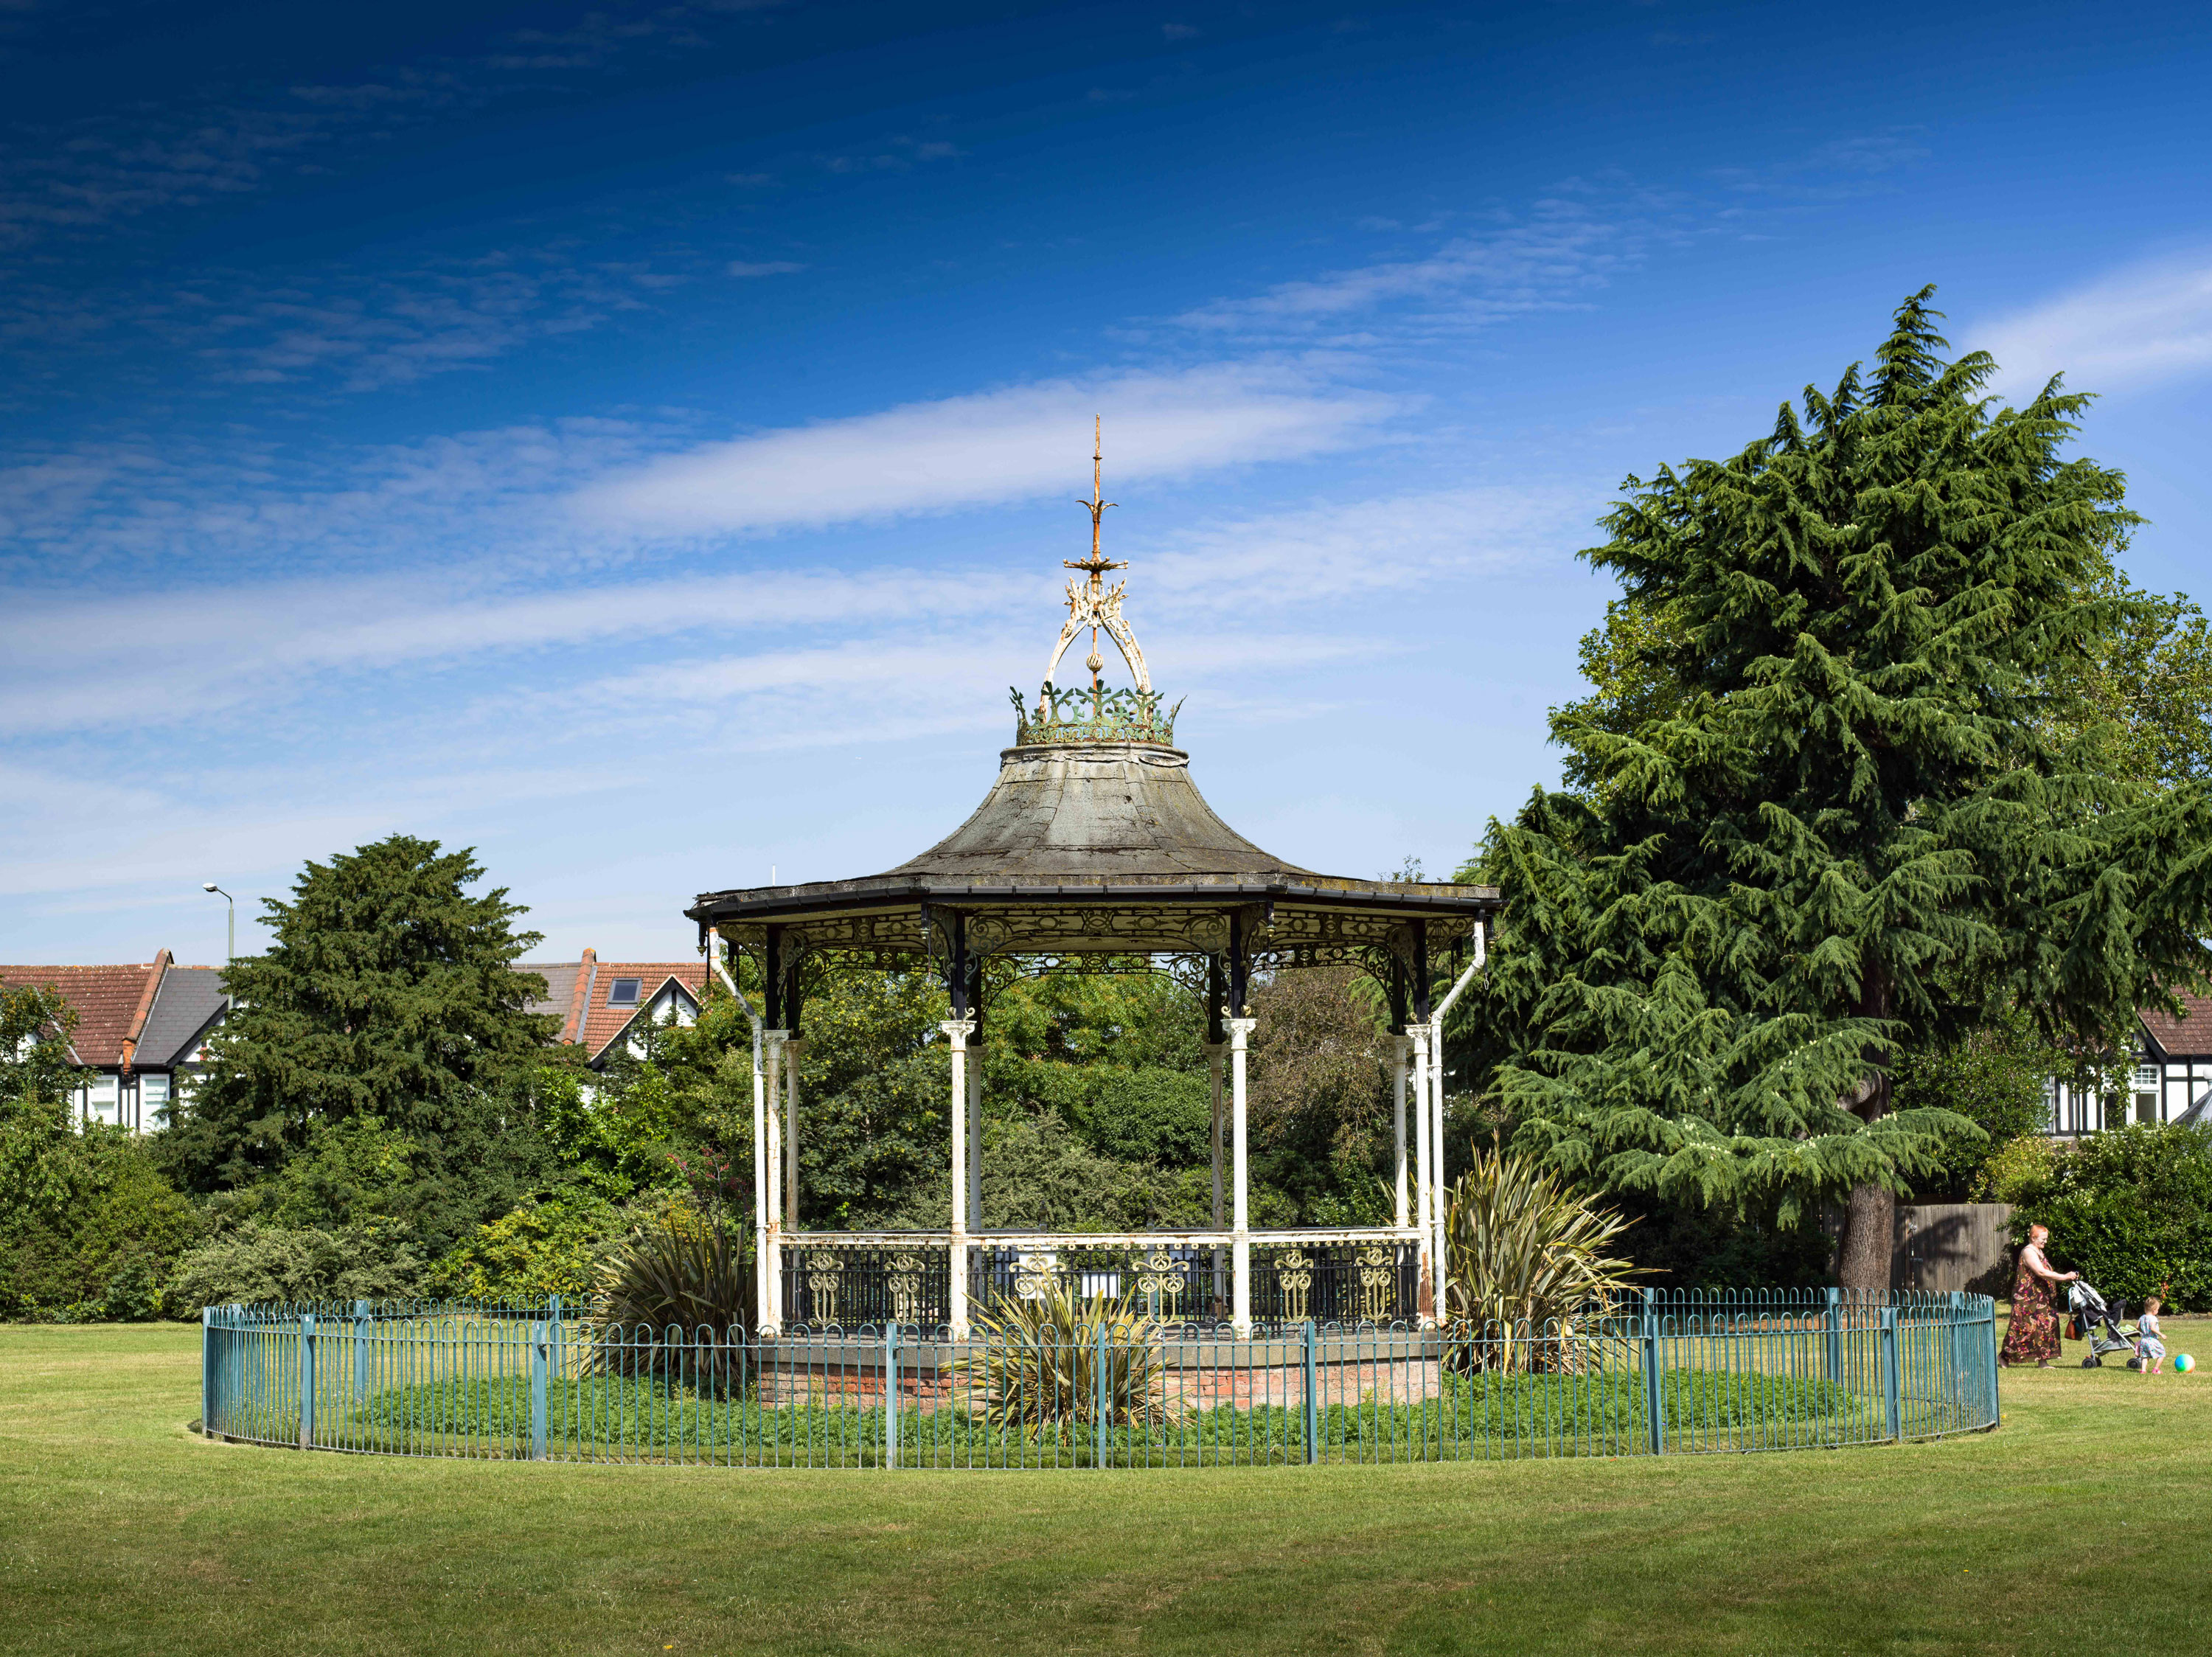 Image of the "Bowie Bandstand" in Beckenham during the summer of 2019